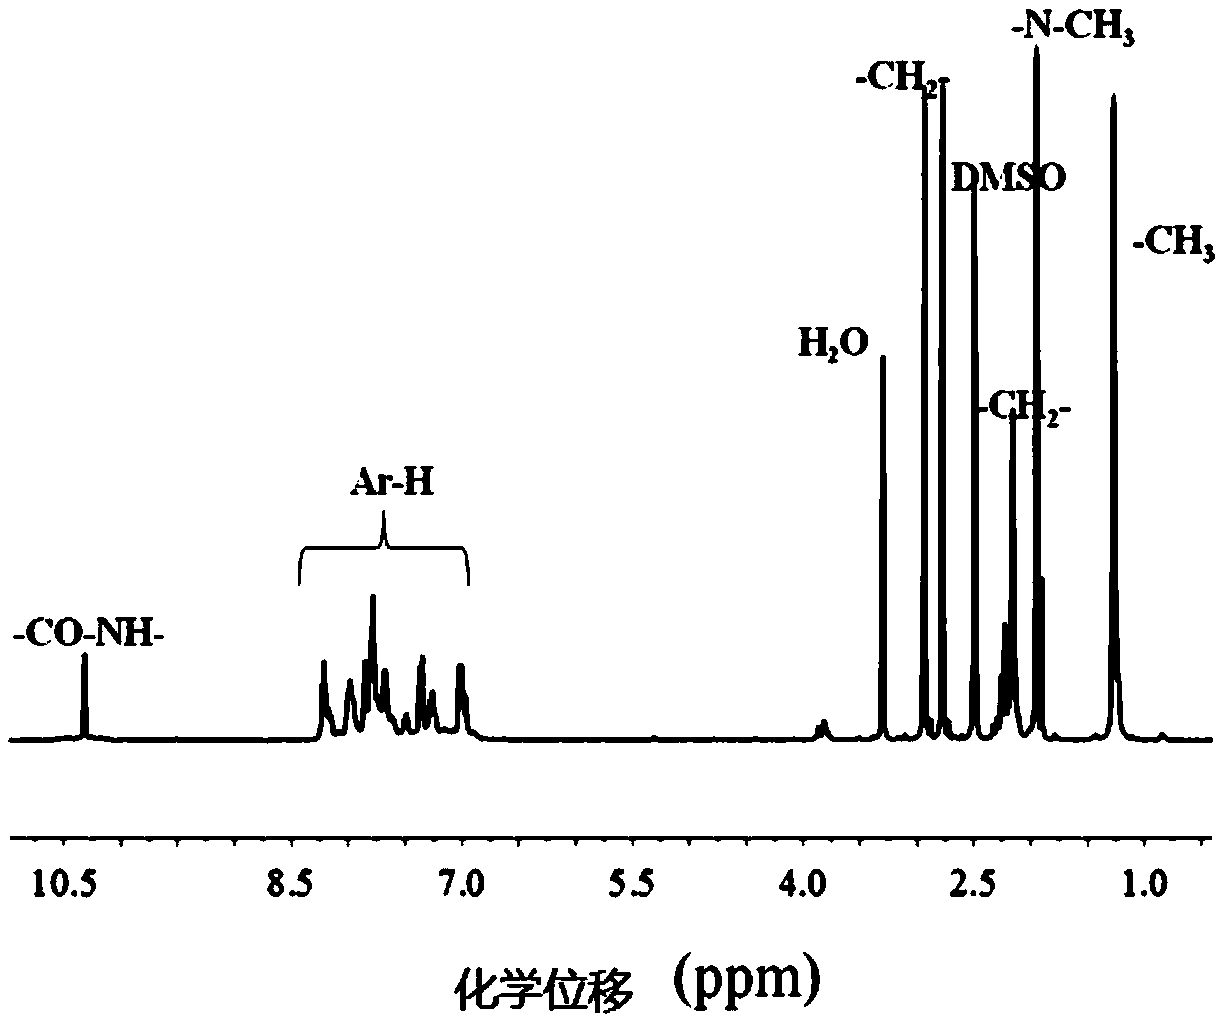 Polyimide derivative with di-tetra-tert-butyl phenylamine structure and naphthalimide fluorescent group as well as preparation method and application of polyimide derivative